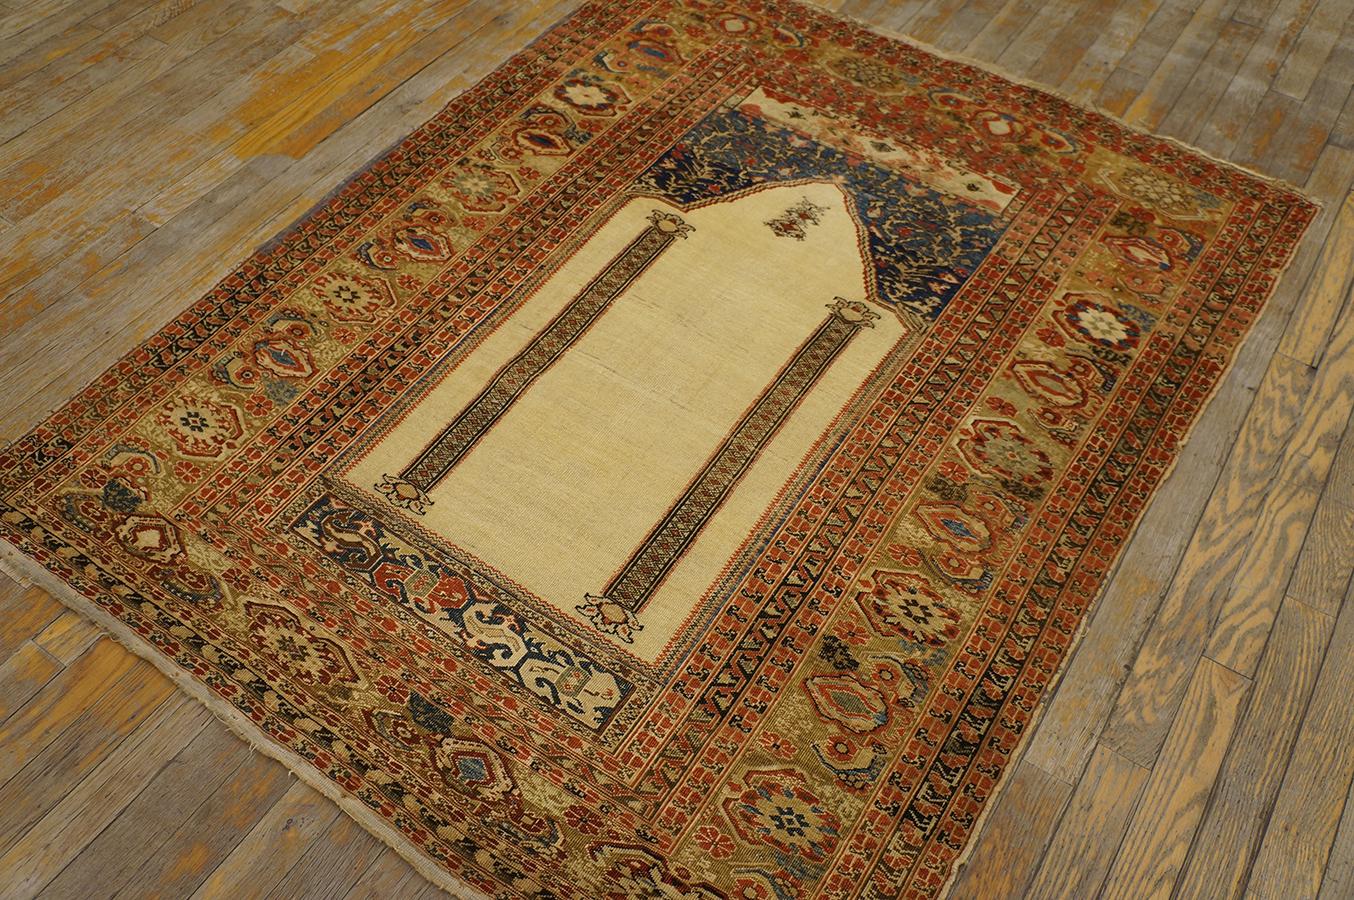 Ghiordes Prayer Rug
Western Anatolia
3’10” x 5’ – 117 x 153 cm
Mid-18th Century
Warp: wool, beige, natural, z-2-s
Weft:  wool, beige, natural, Z-1 with a few Z-2; cotton selvage wefts penetrate into rug body about 1” average
Pile: wool, z-spun; or